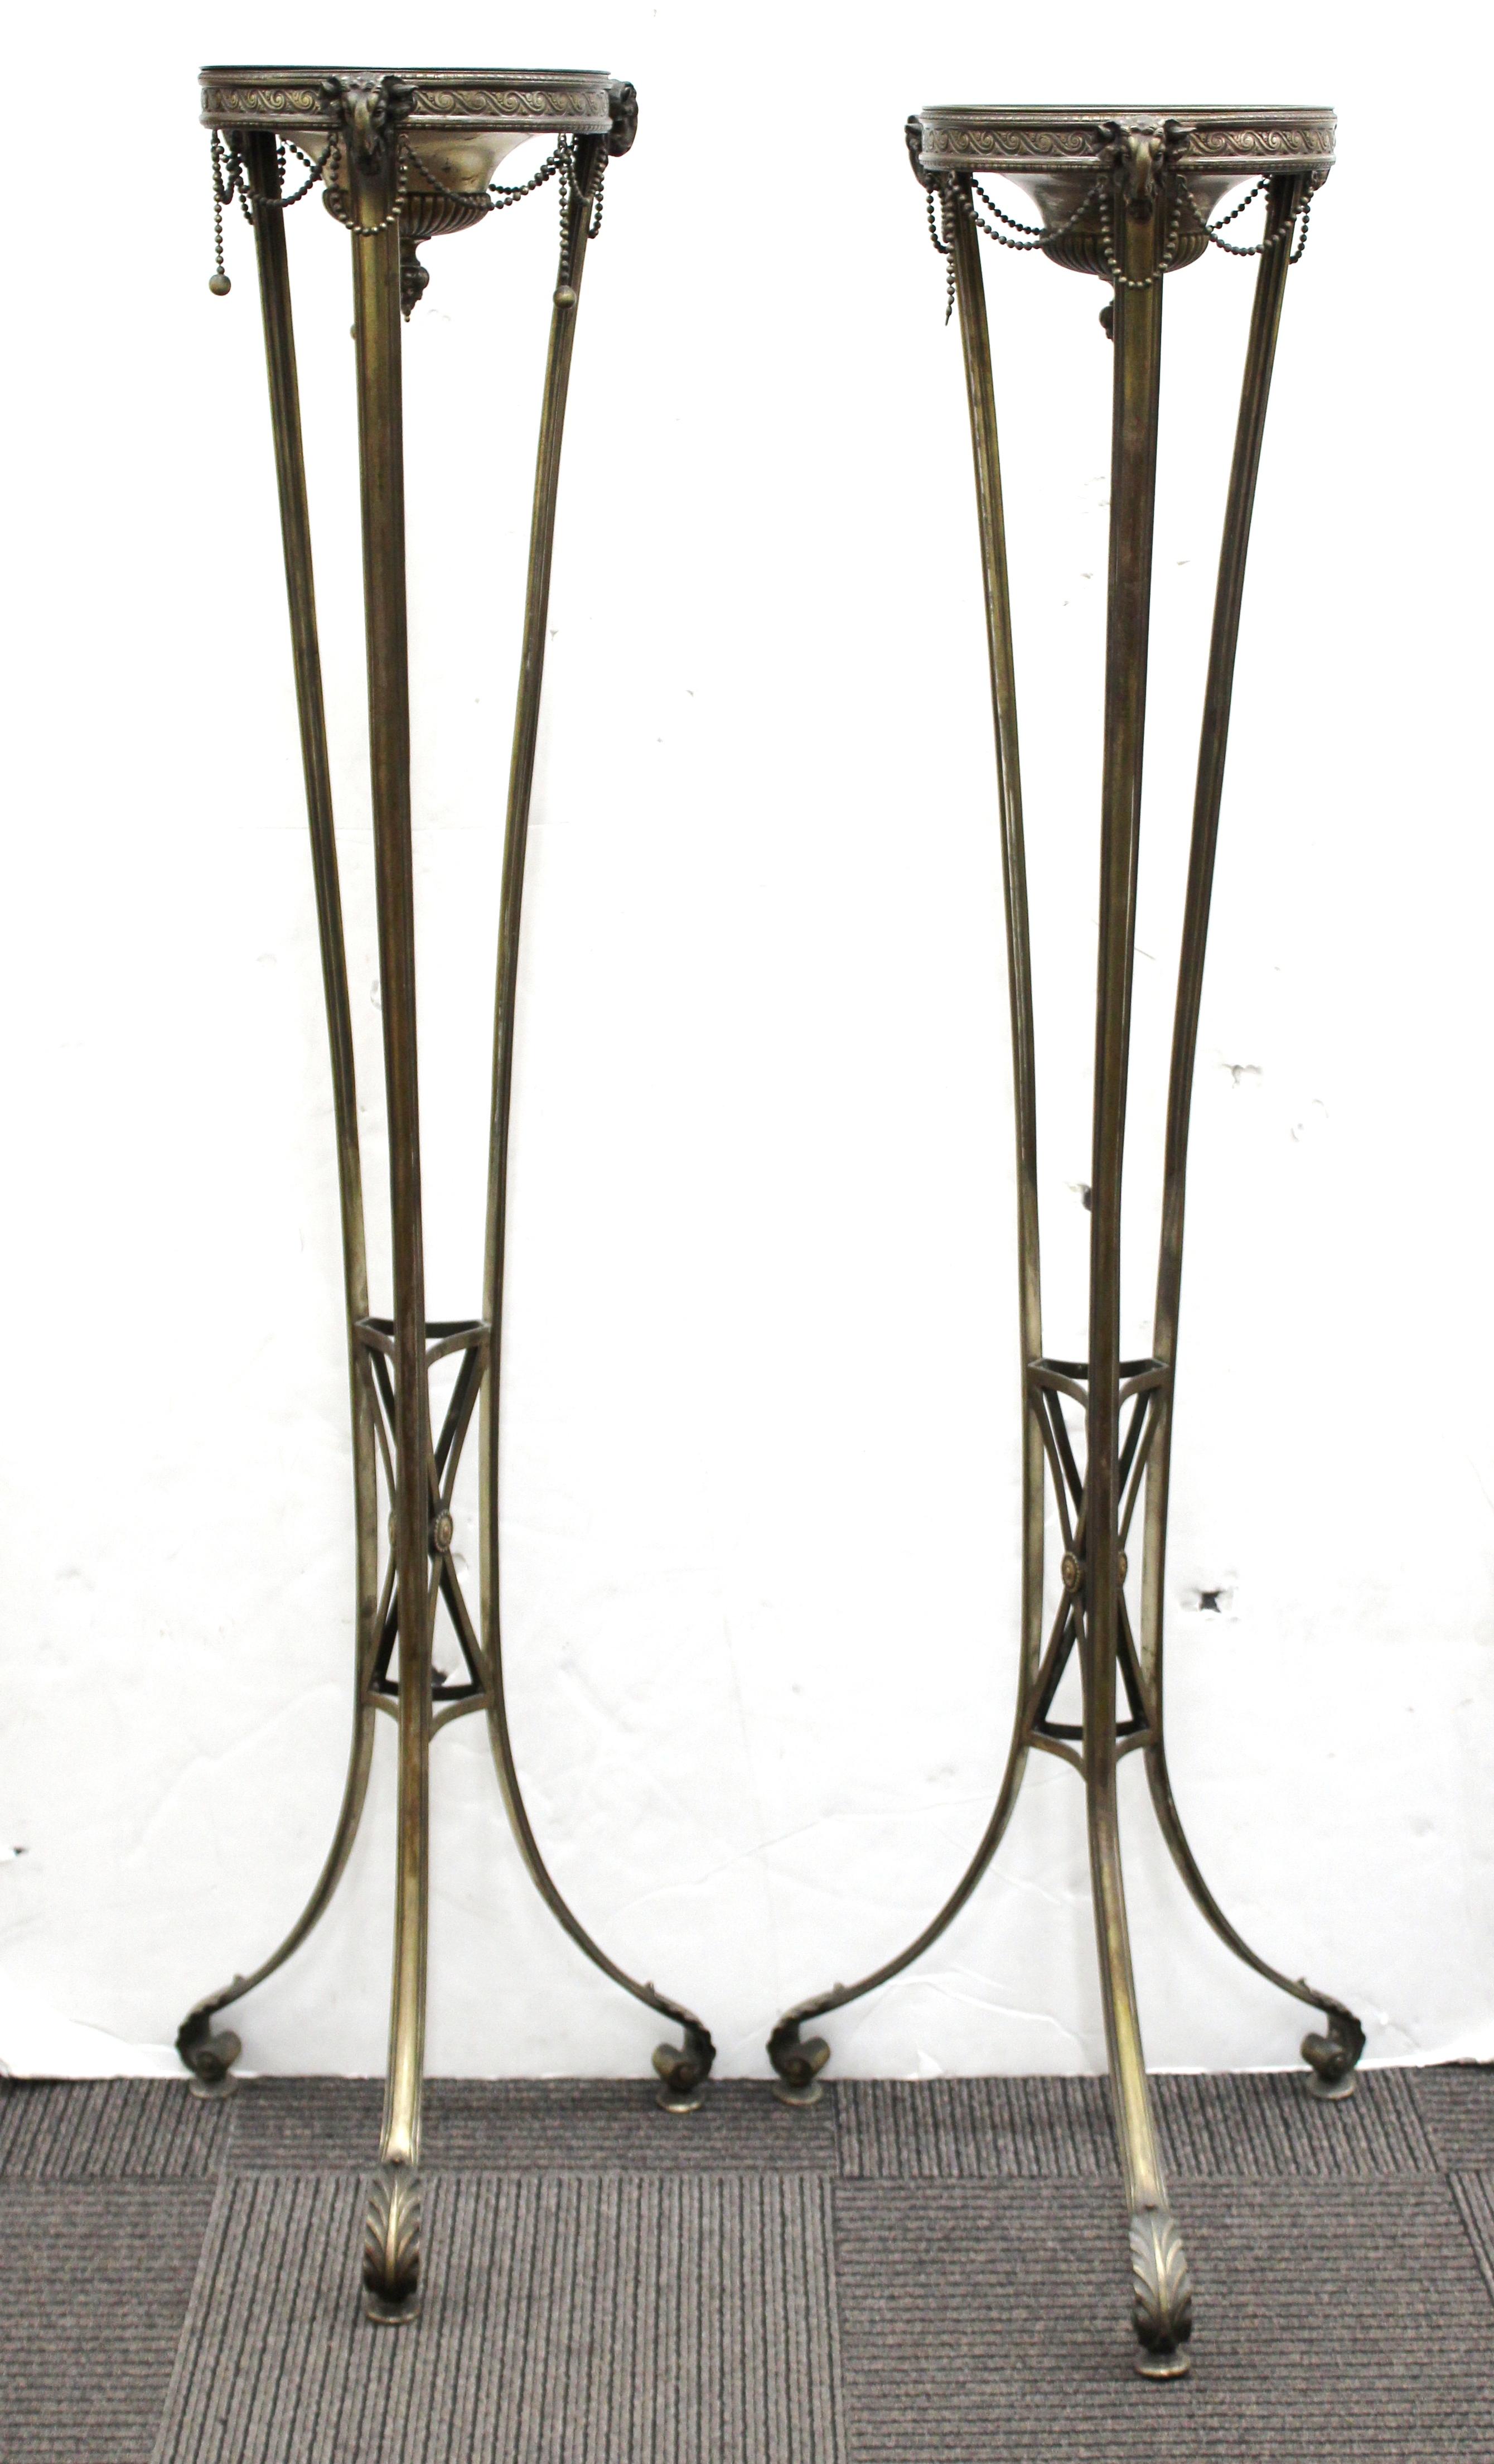 Austrian Neoclassical Revival pair of monumental torcheres in silvered bronze. The pair is not electrified but can be wired to accommodate lamps. Made in Austria during the 1880s. A few chain baubles are missing and the surfaces have age-appropriate